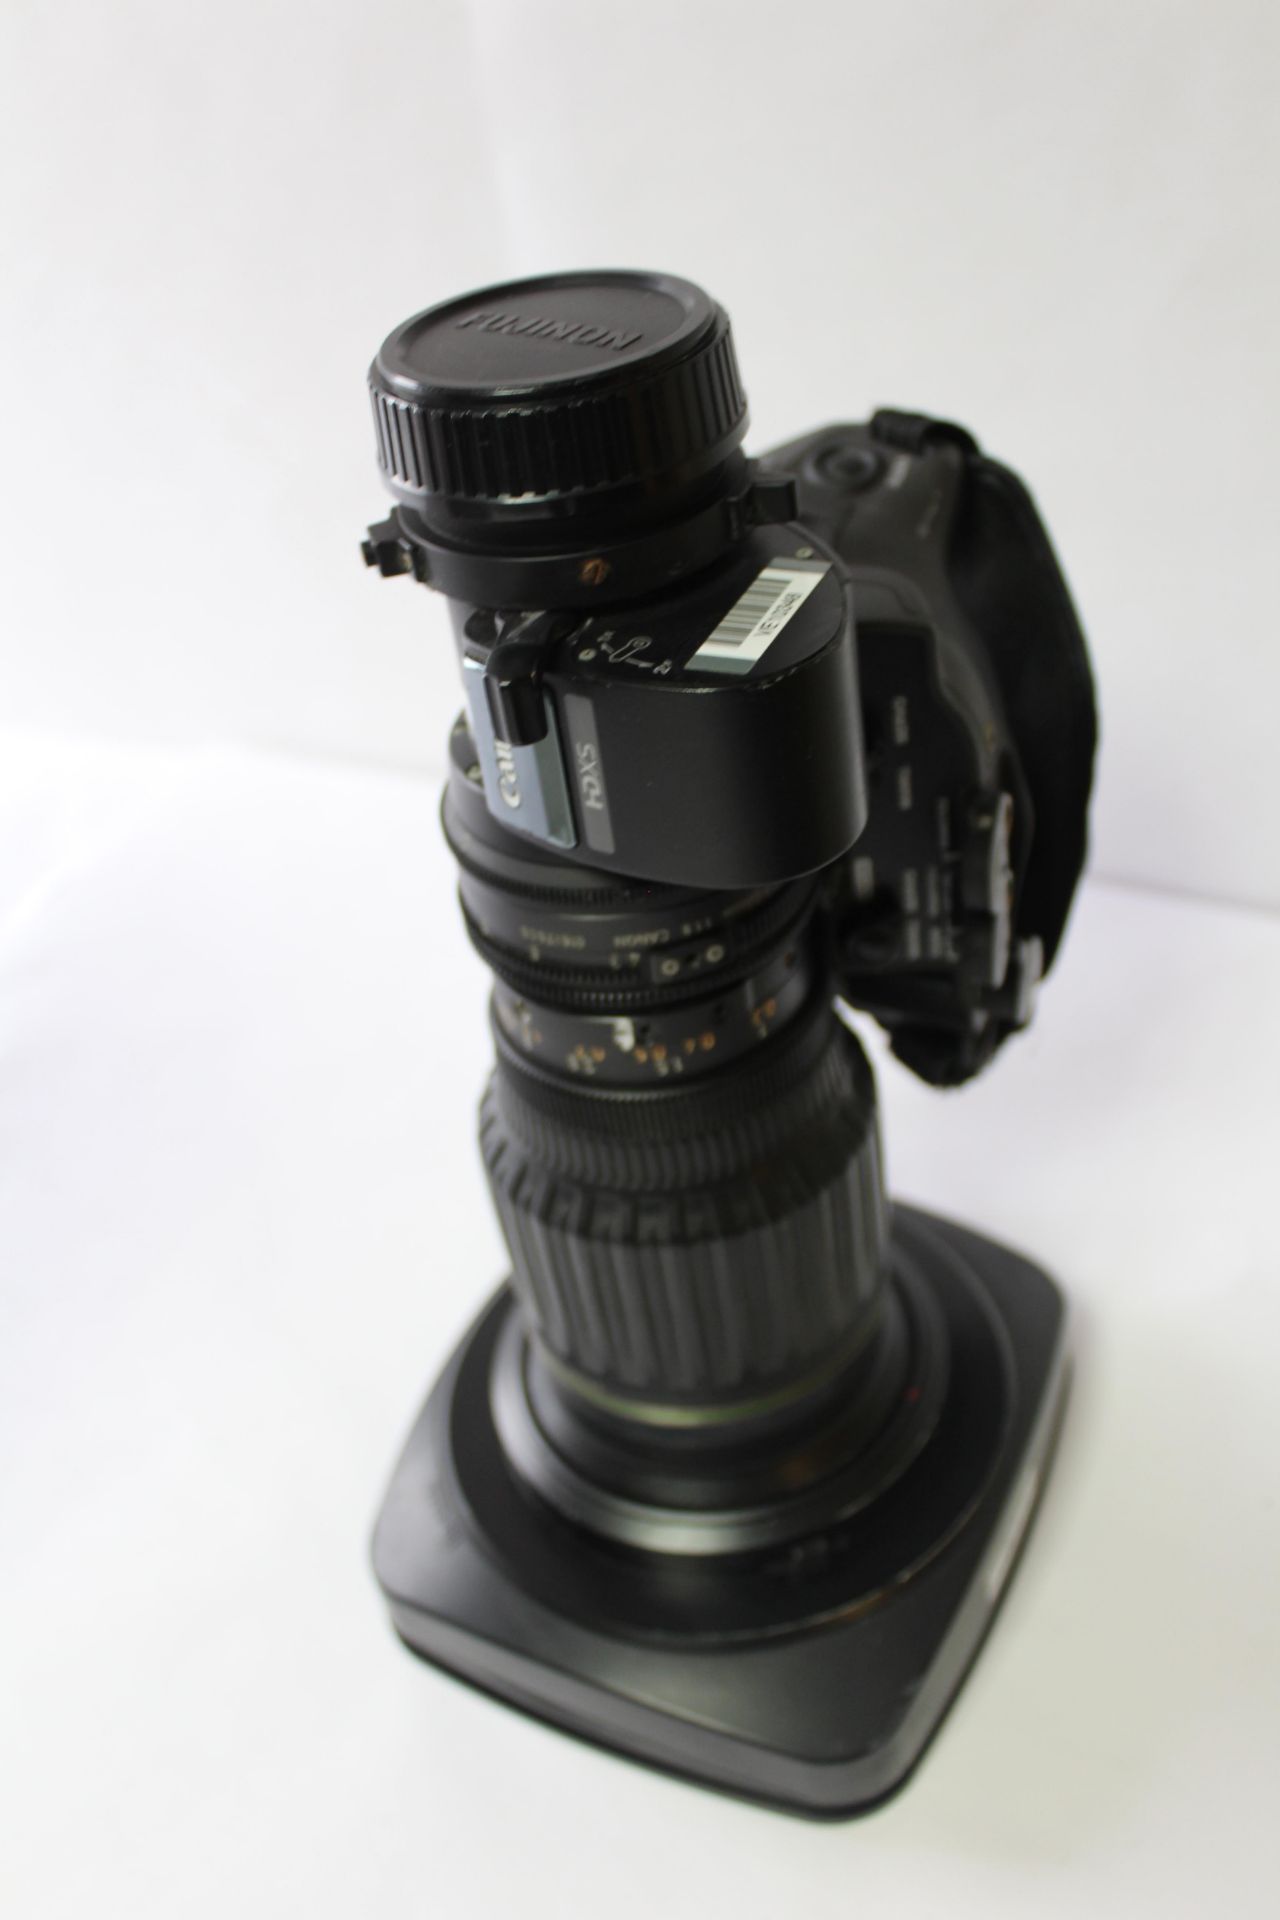 Canon HJ14EX7.3B HDTV Broadcast Zoom Lens with Flight Case - Image 2 of 2